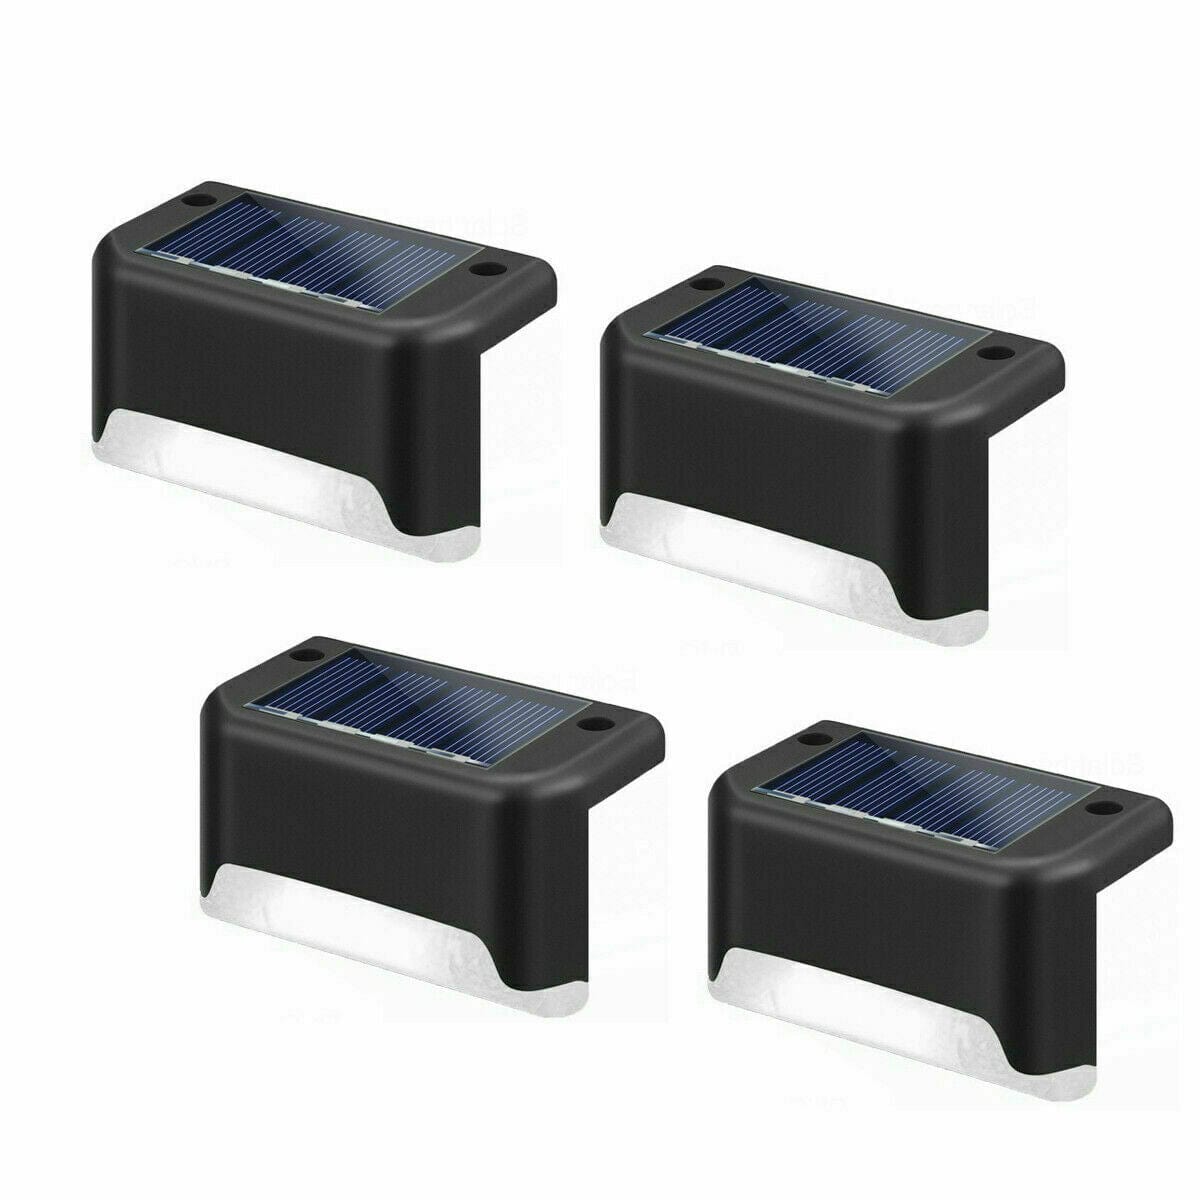 4Pcs Brown (Led: White) Solar-Powered LED Deck Lights - Outdoor Bright Lighting for Garden, Patio, Pathway, Stairs & Fence